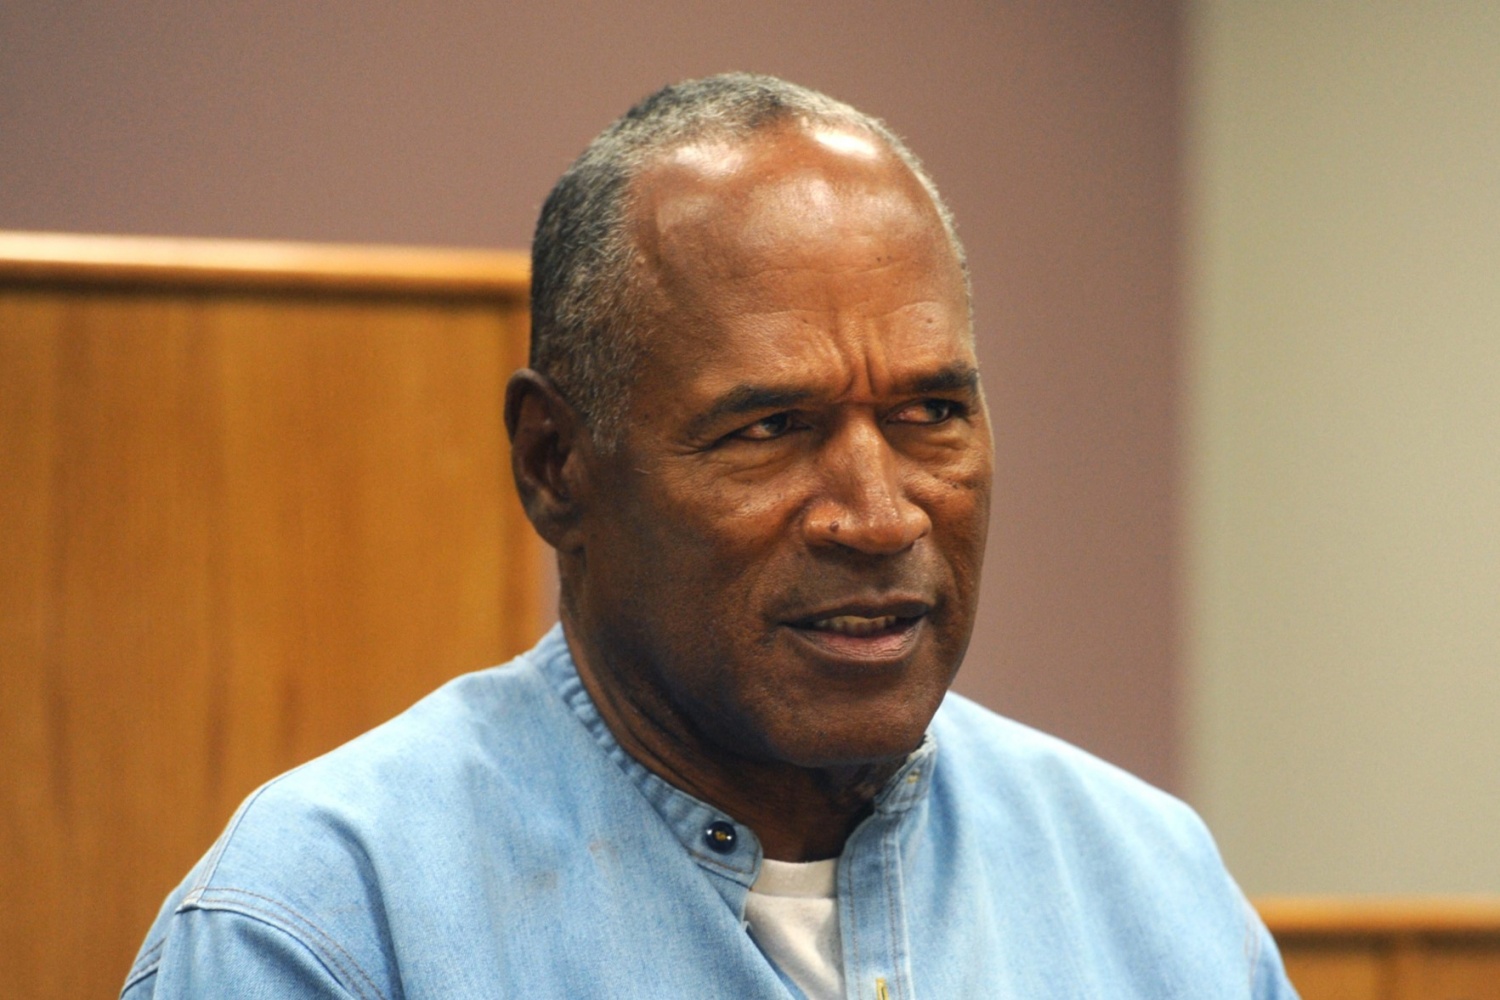 O.J. Simpson Mentioned in These Songs